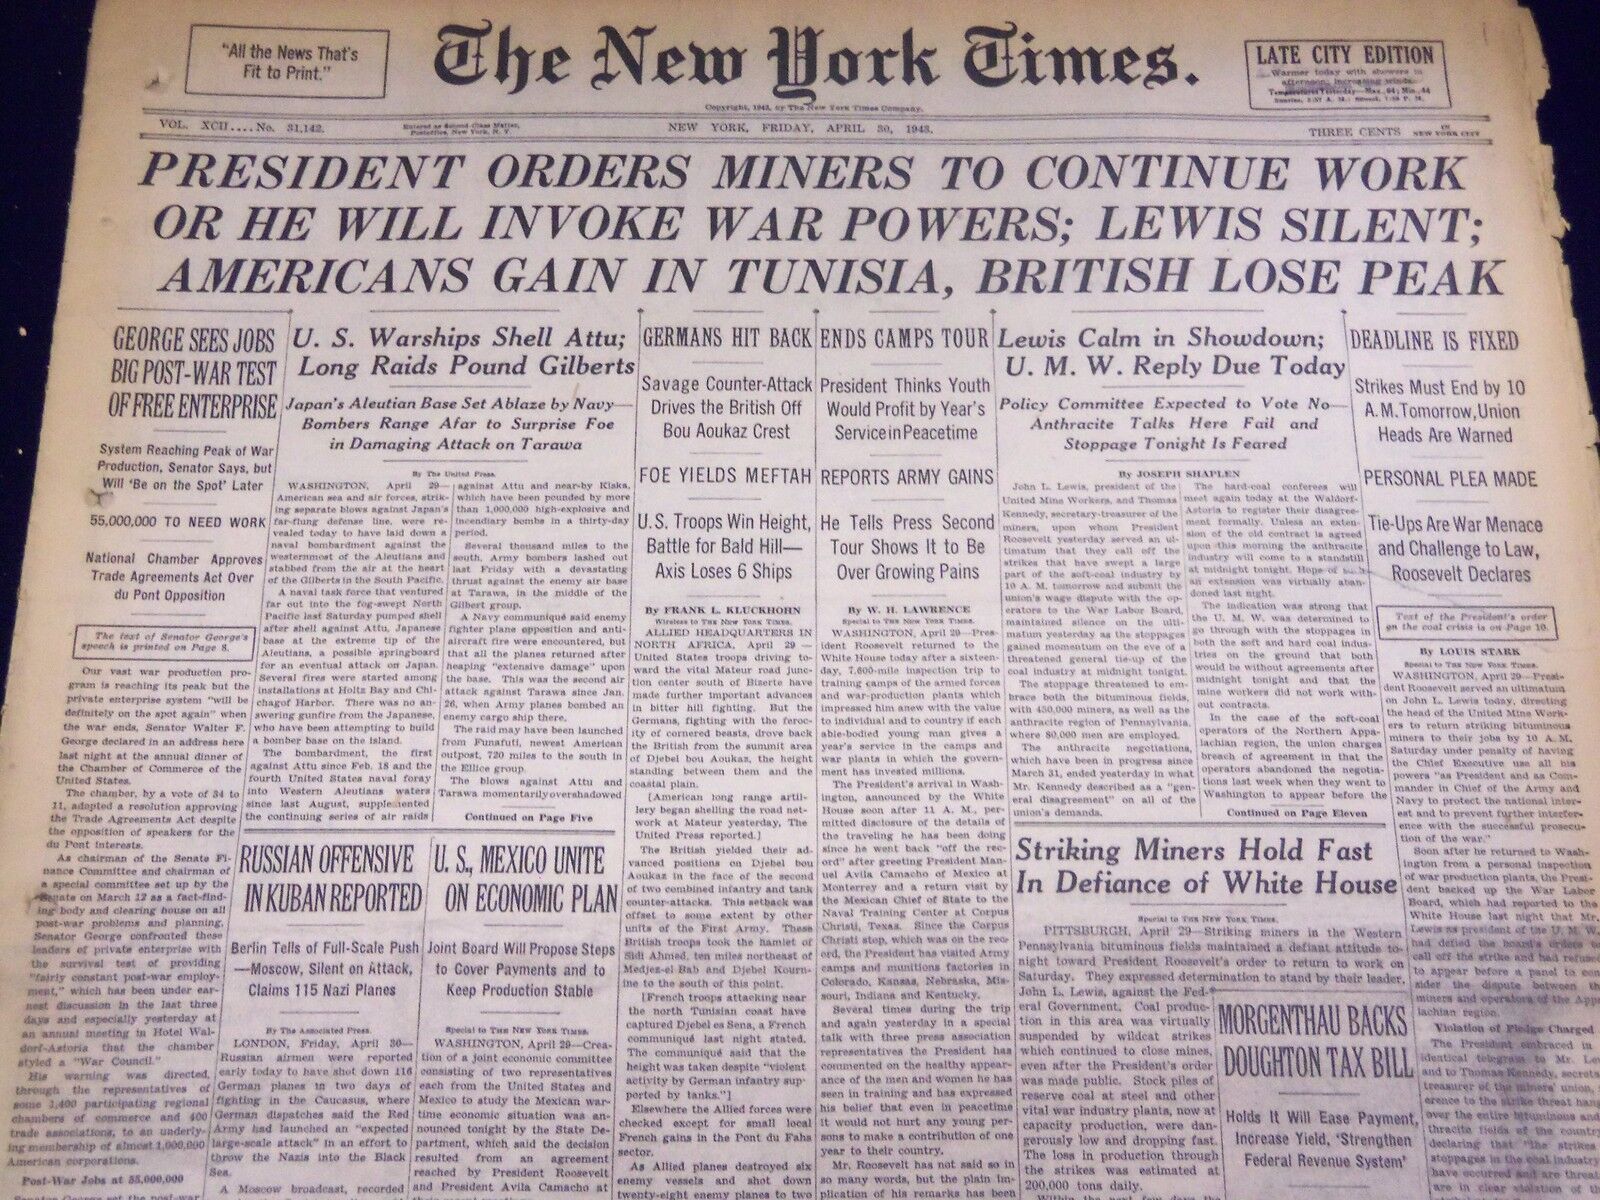 1943 APRIL 30 NEW YORK TIMES - PRESIDENT ORDERS MINERS TO CONTINUE WORK- NT 1750